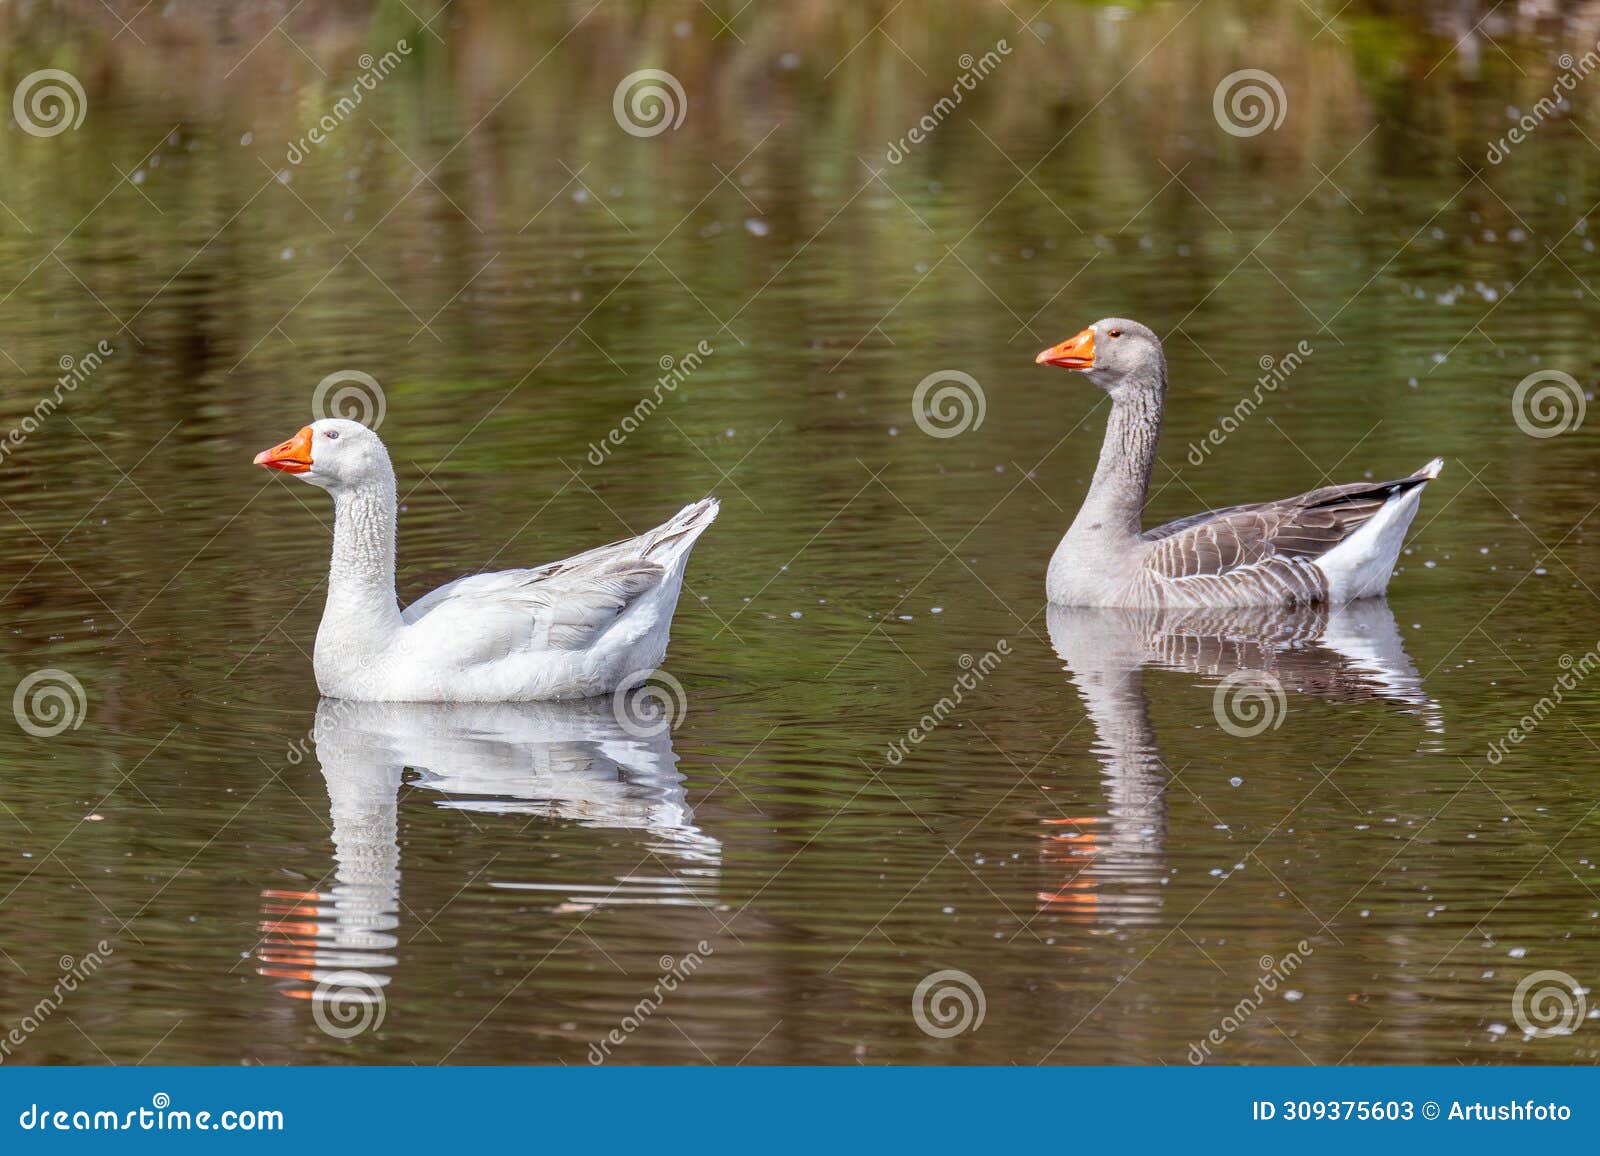 greylag goose or graylag goose (anser anser), departement cundinamarca. wildlife and birdwatching in colombia.